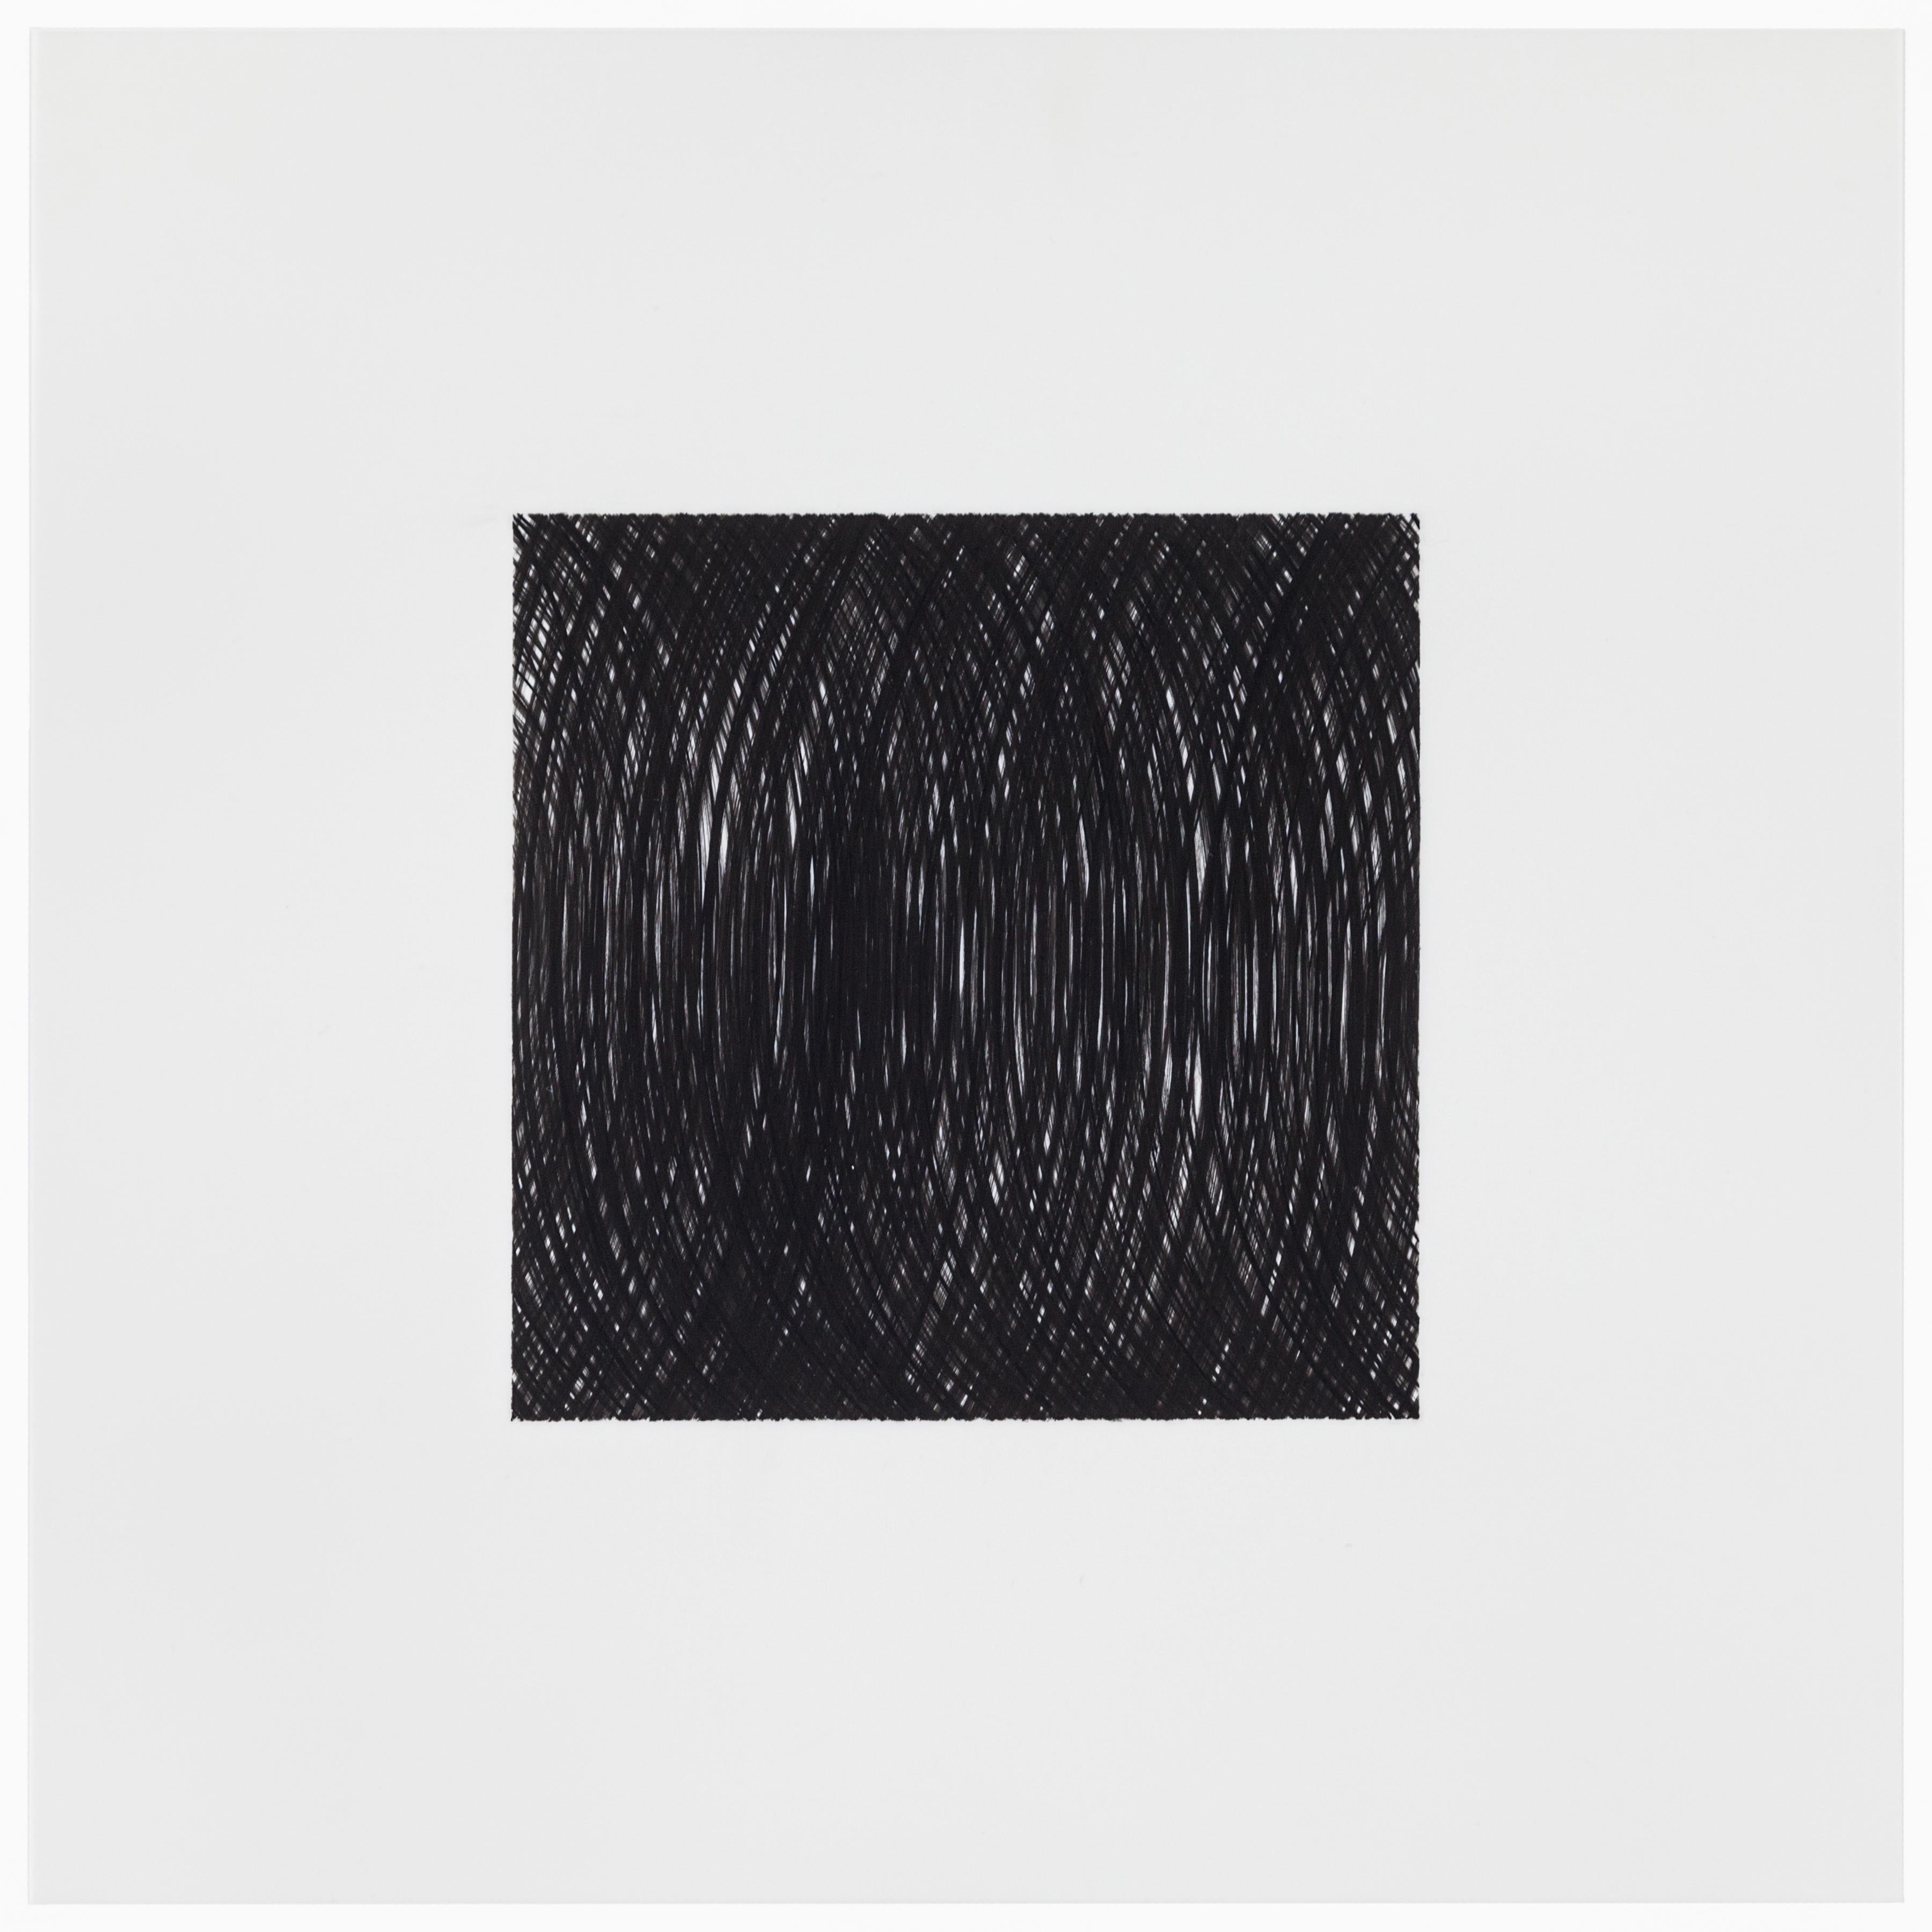 Patrick Carrara Black Ink on Mylar Drawings, Appearance Series, 2013 - 2015 For Sale 2